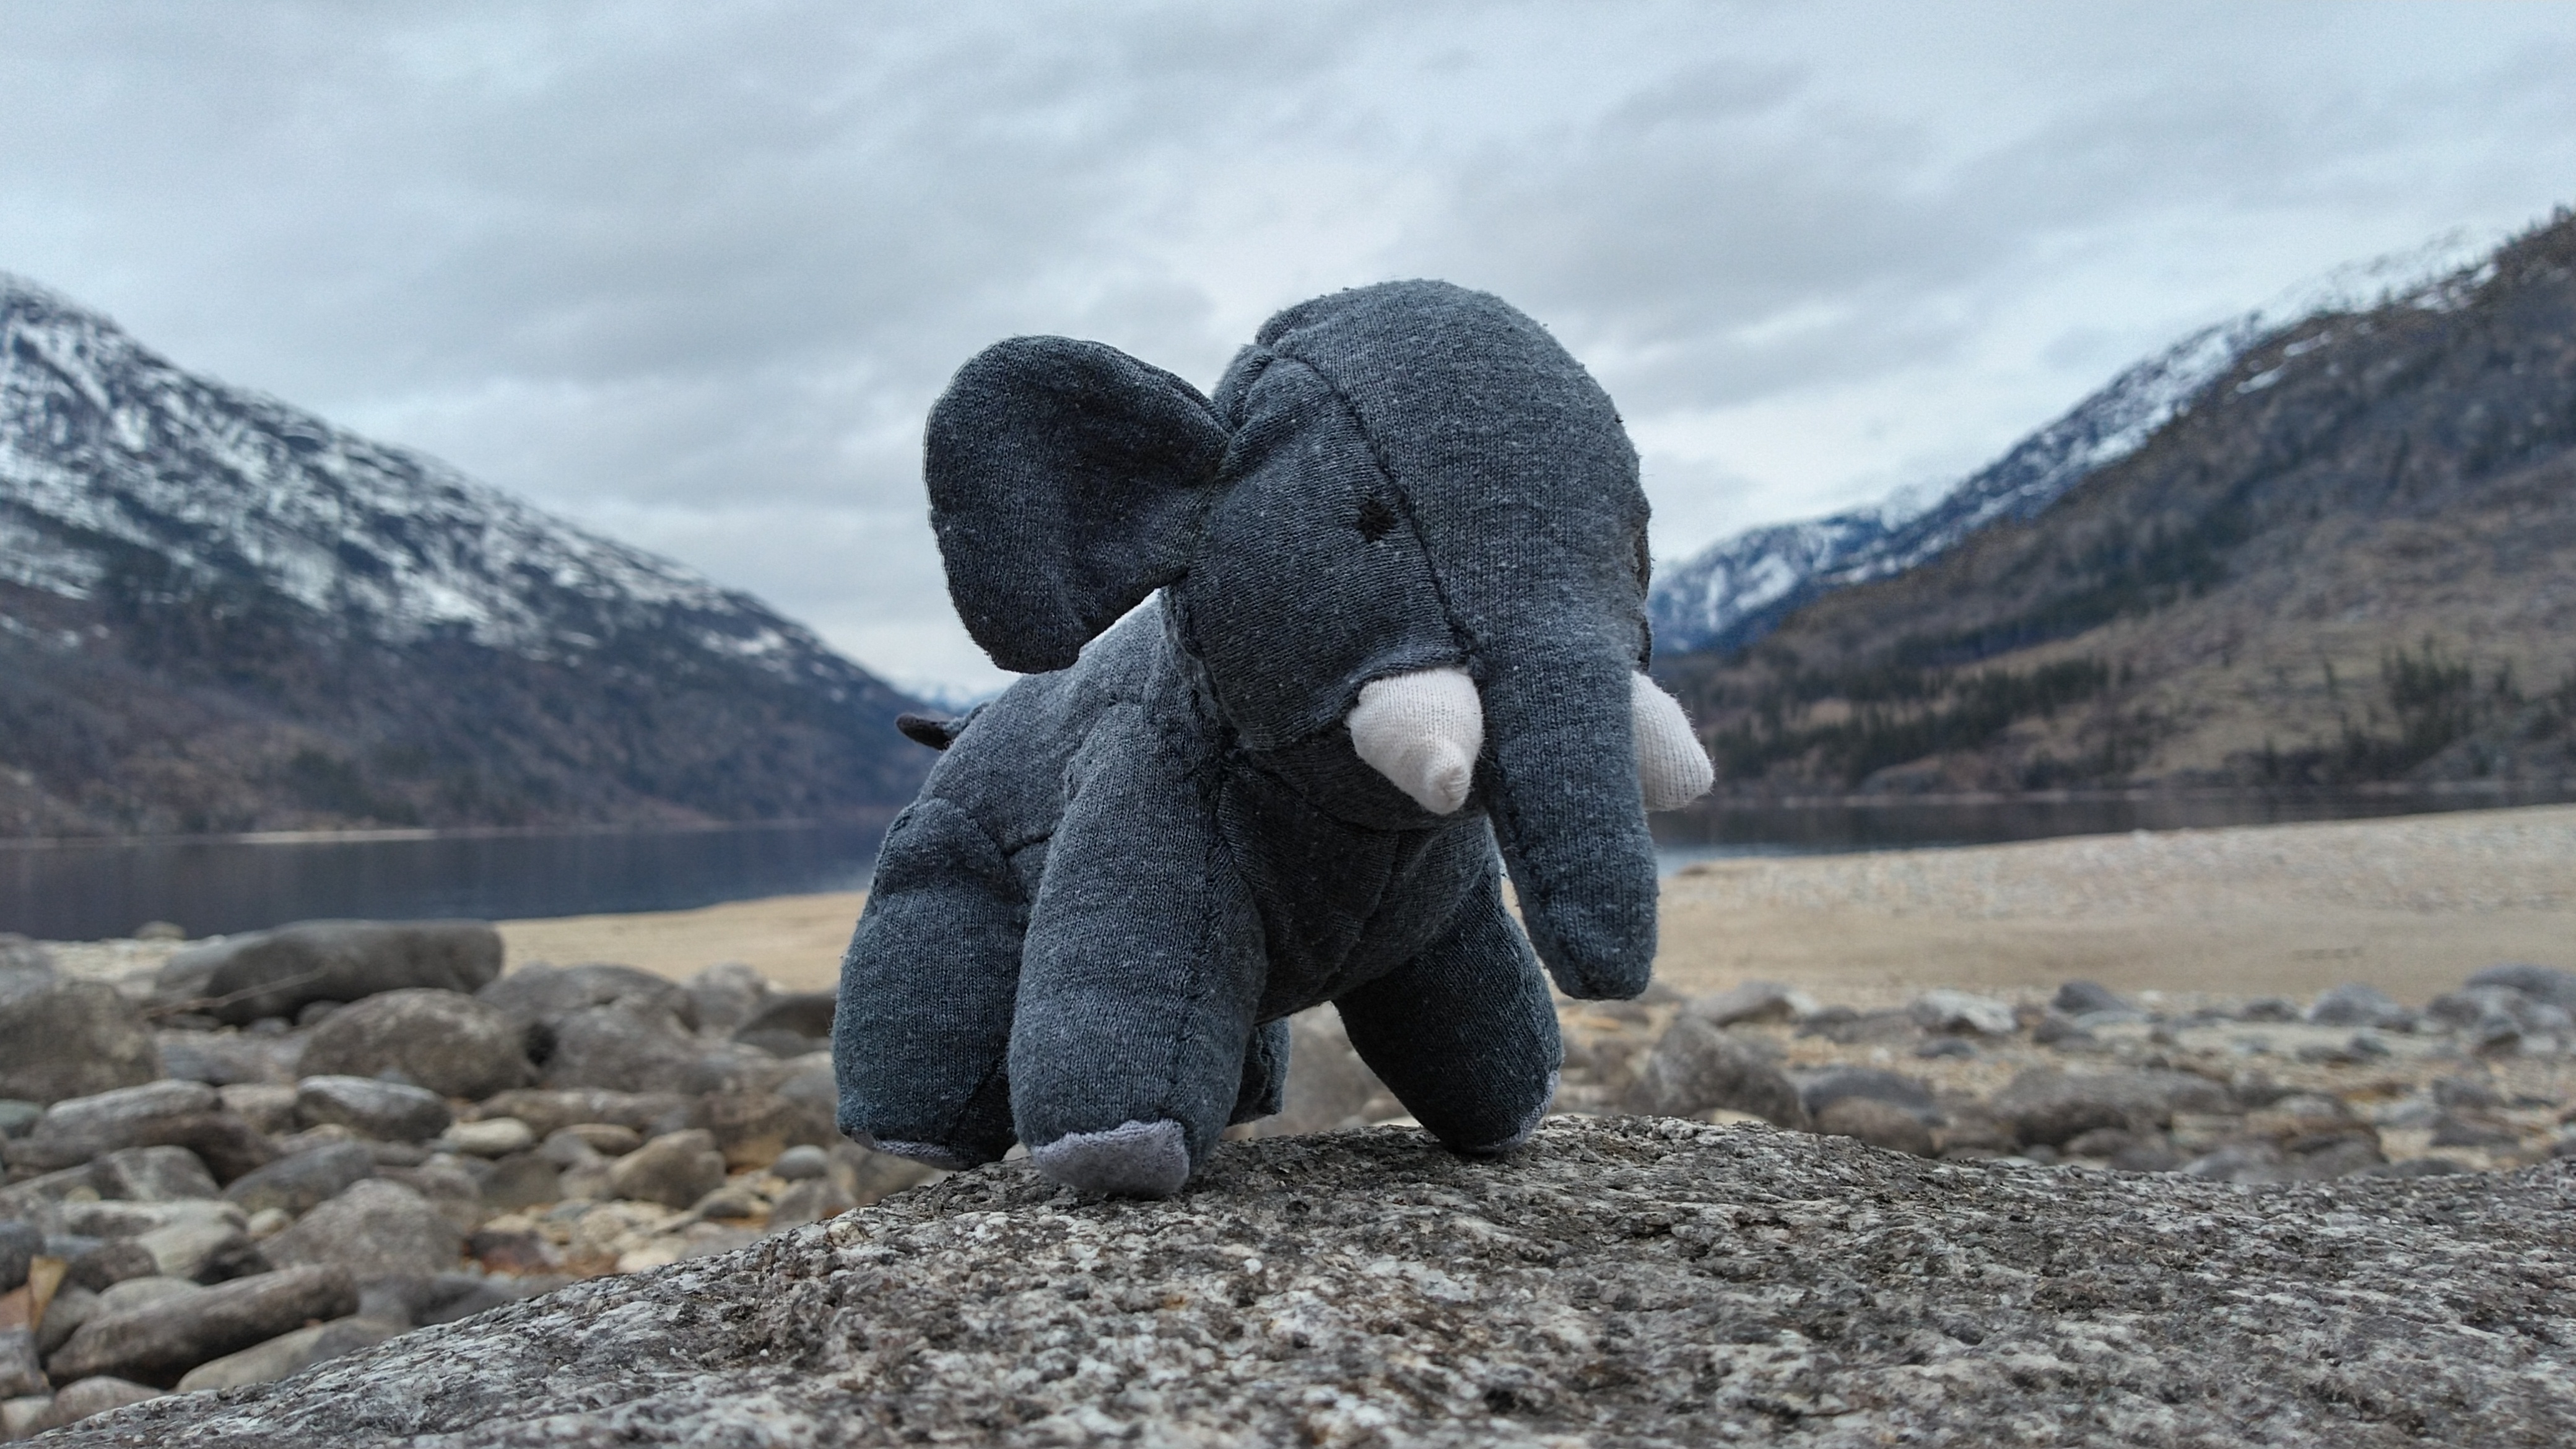 a stuffed animal elephant, standing against the backdrop of a mountain lake